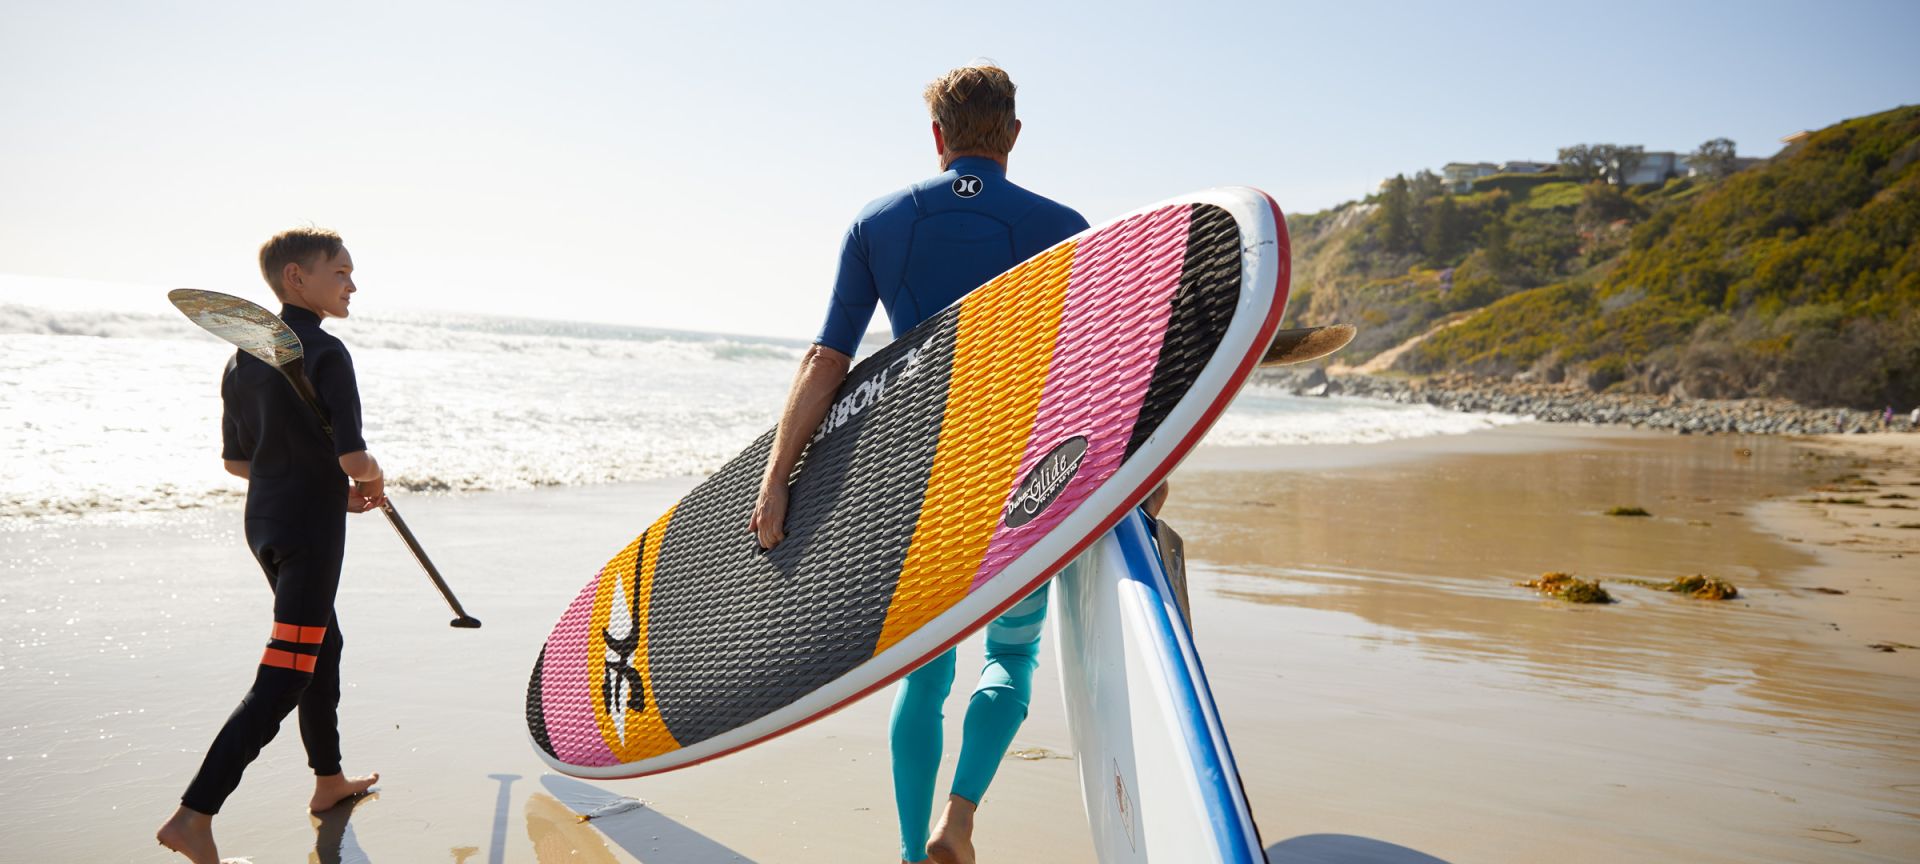 A Man Carrying A Surf Board On A Beach